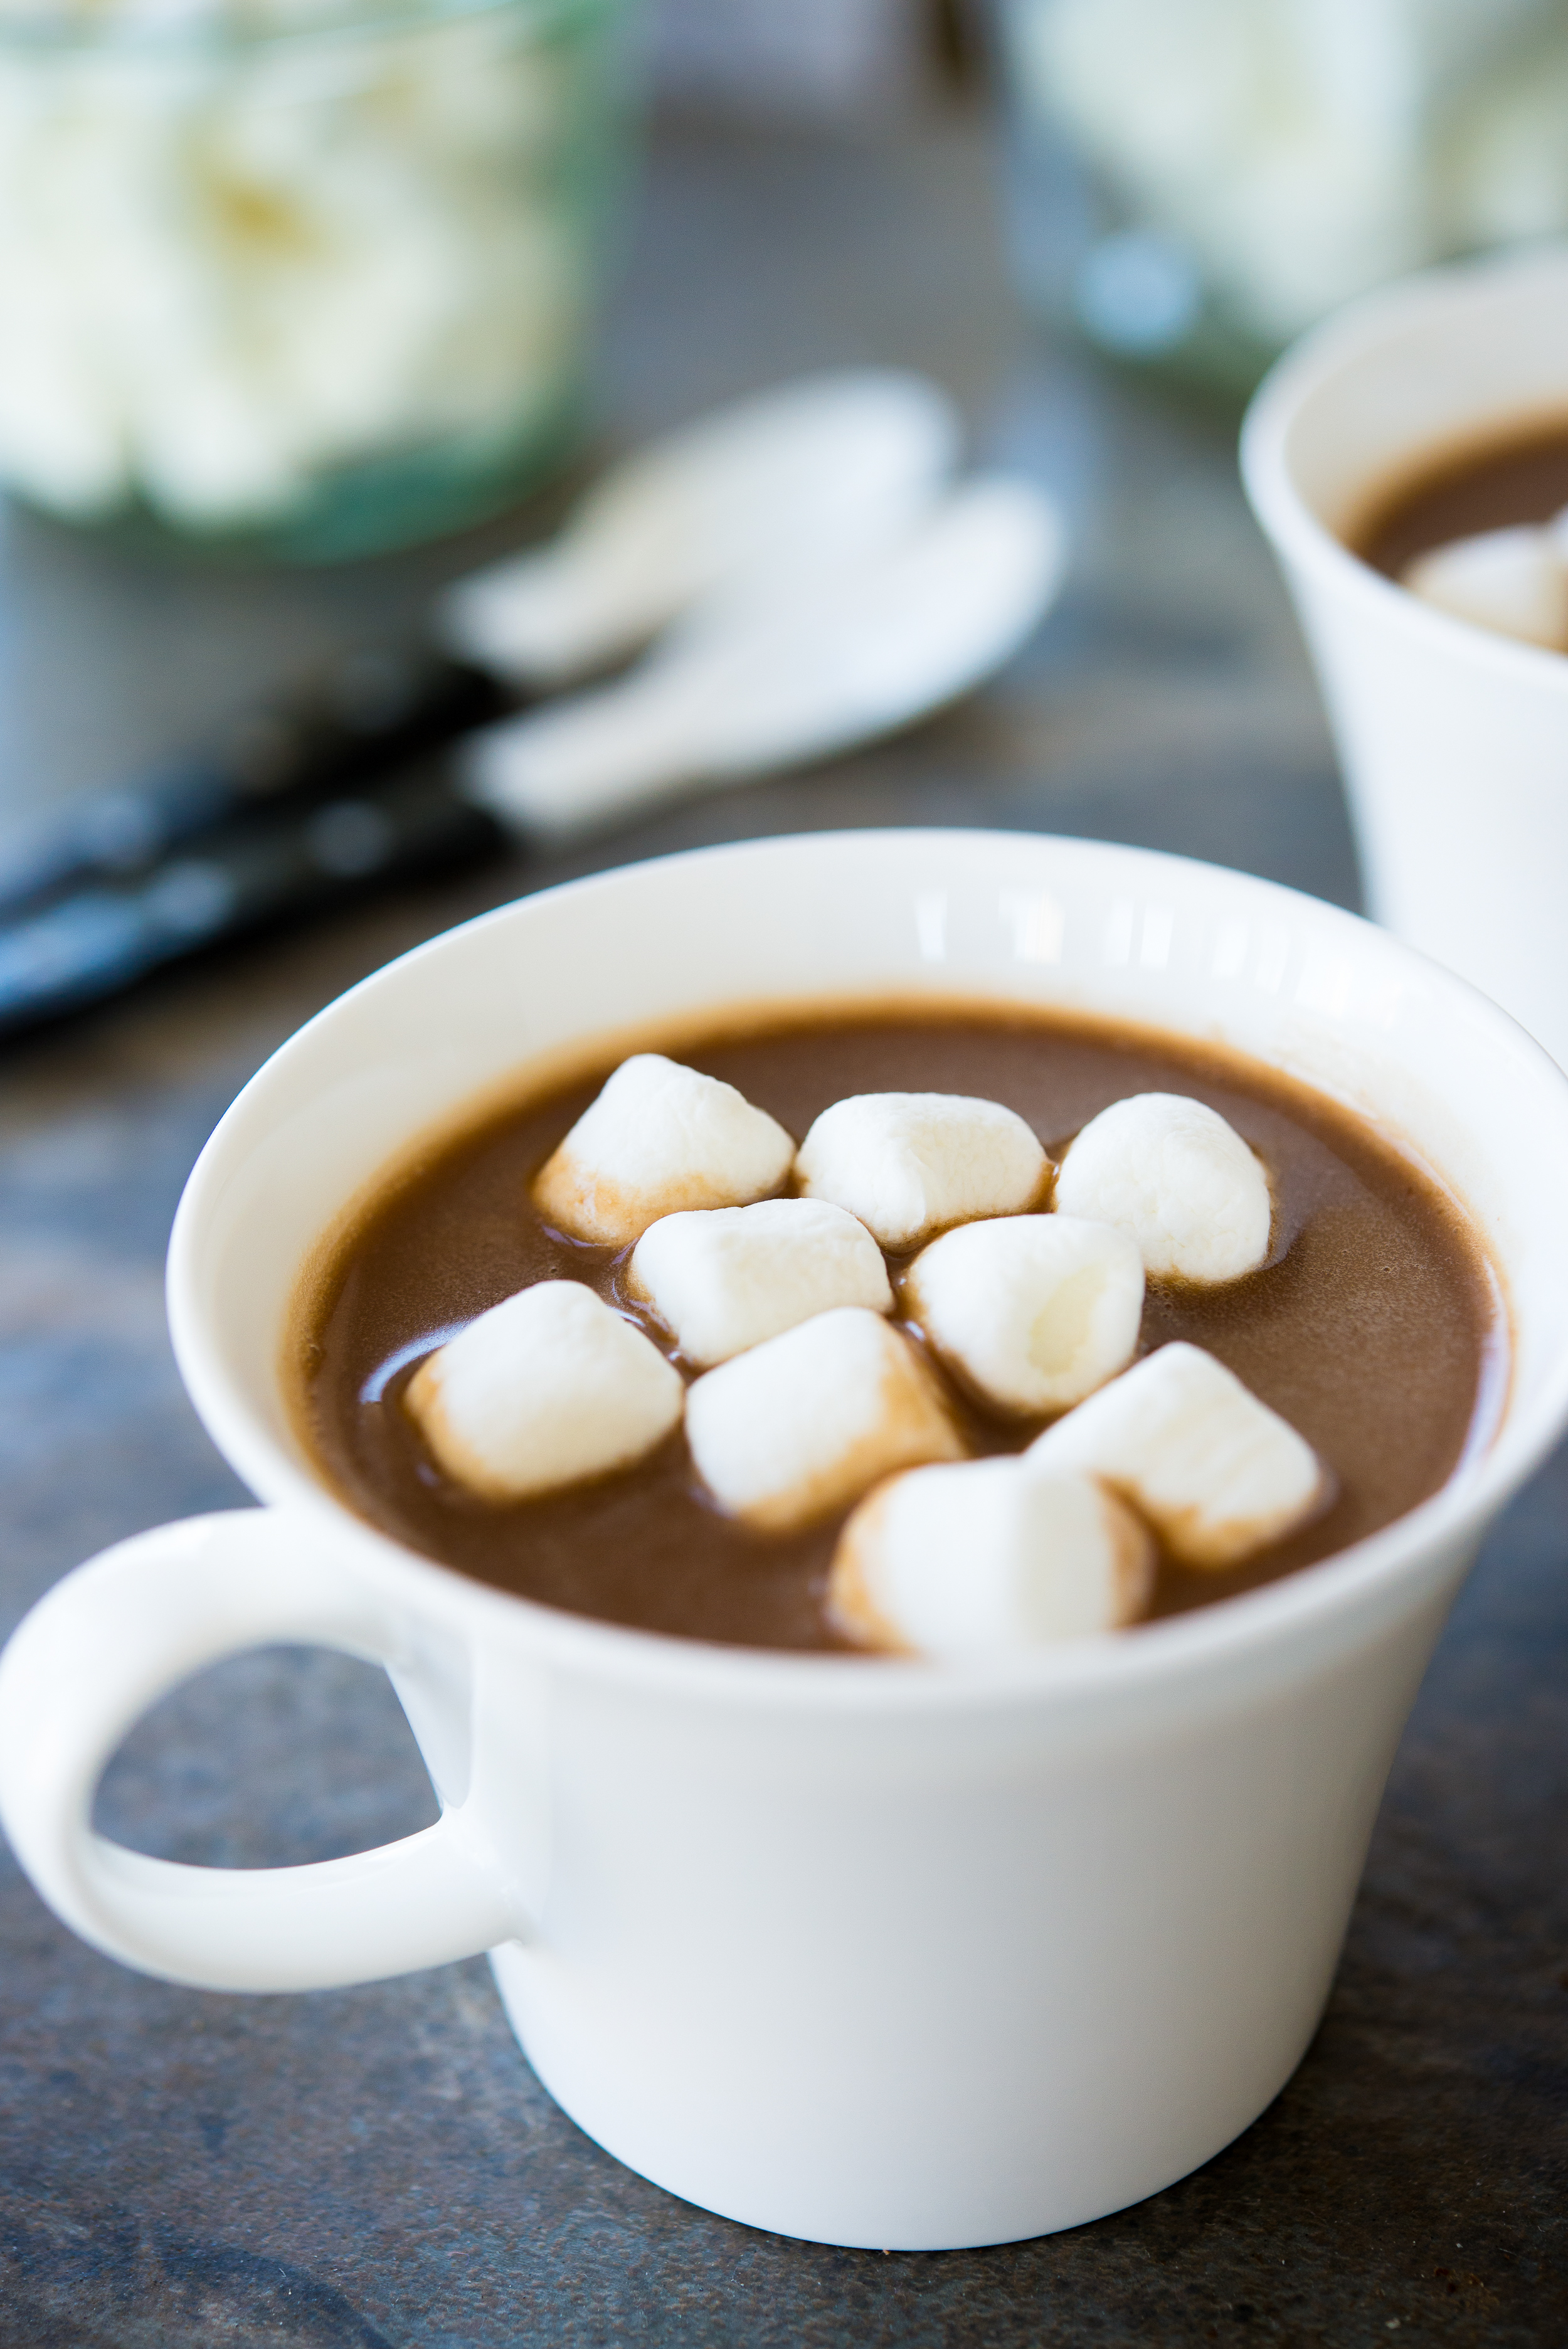 How to Make Hot Chocolate Mix | The Pioneer Woman